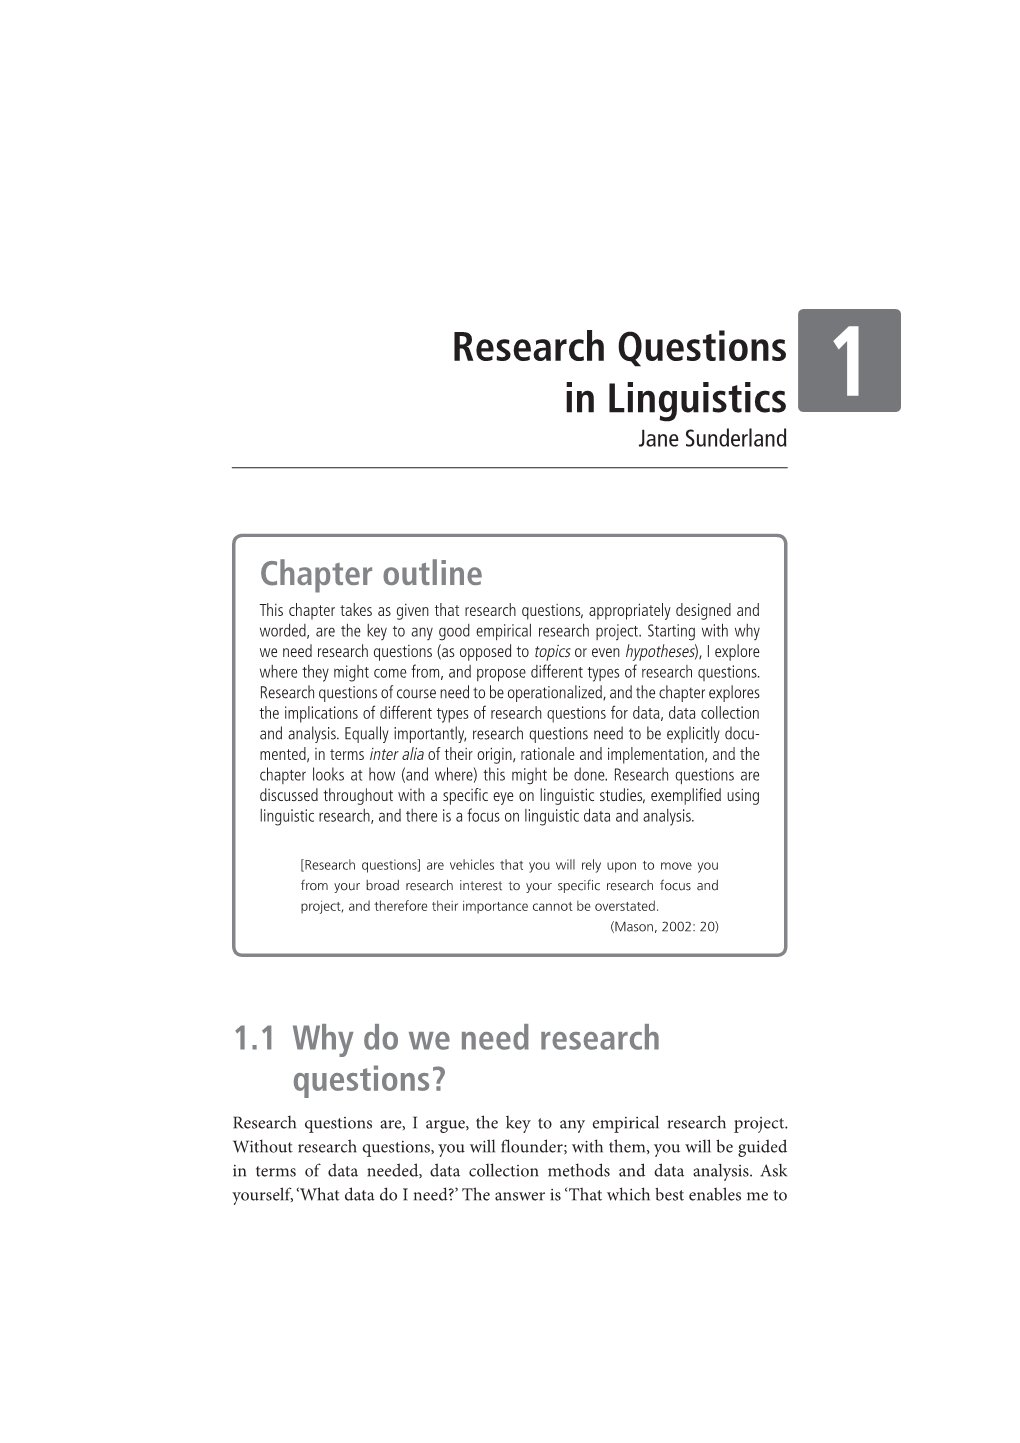 Research Questions in Linguistics 1 Jane Sunderland